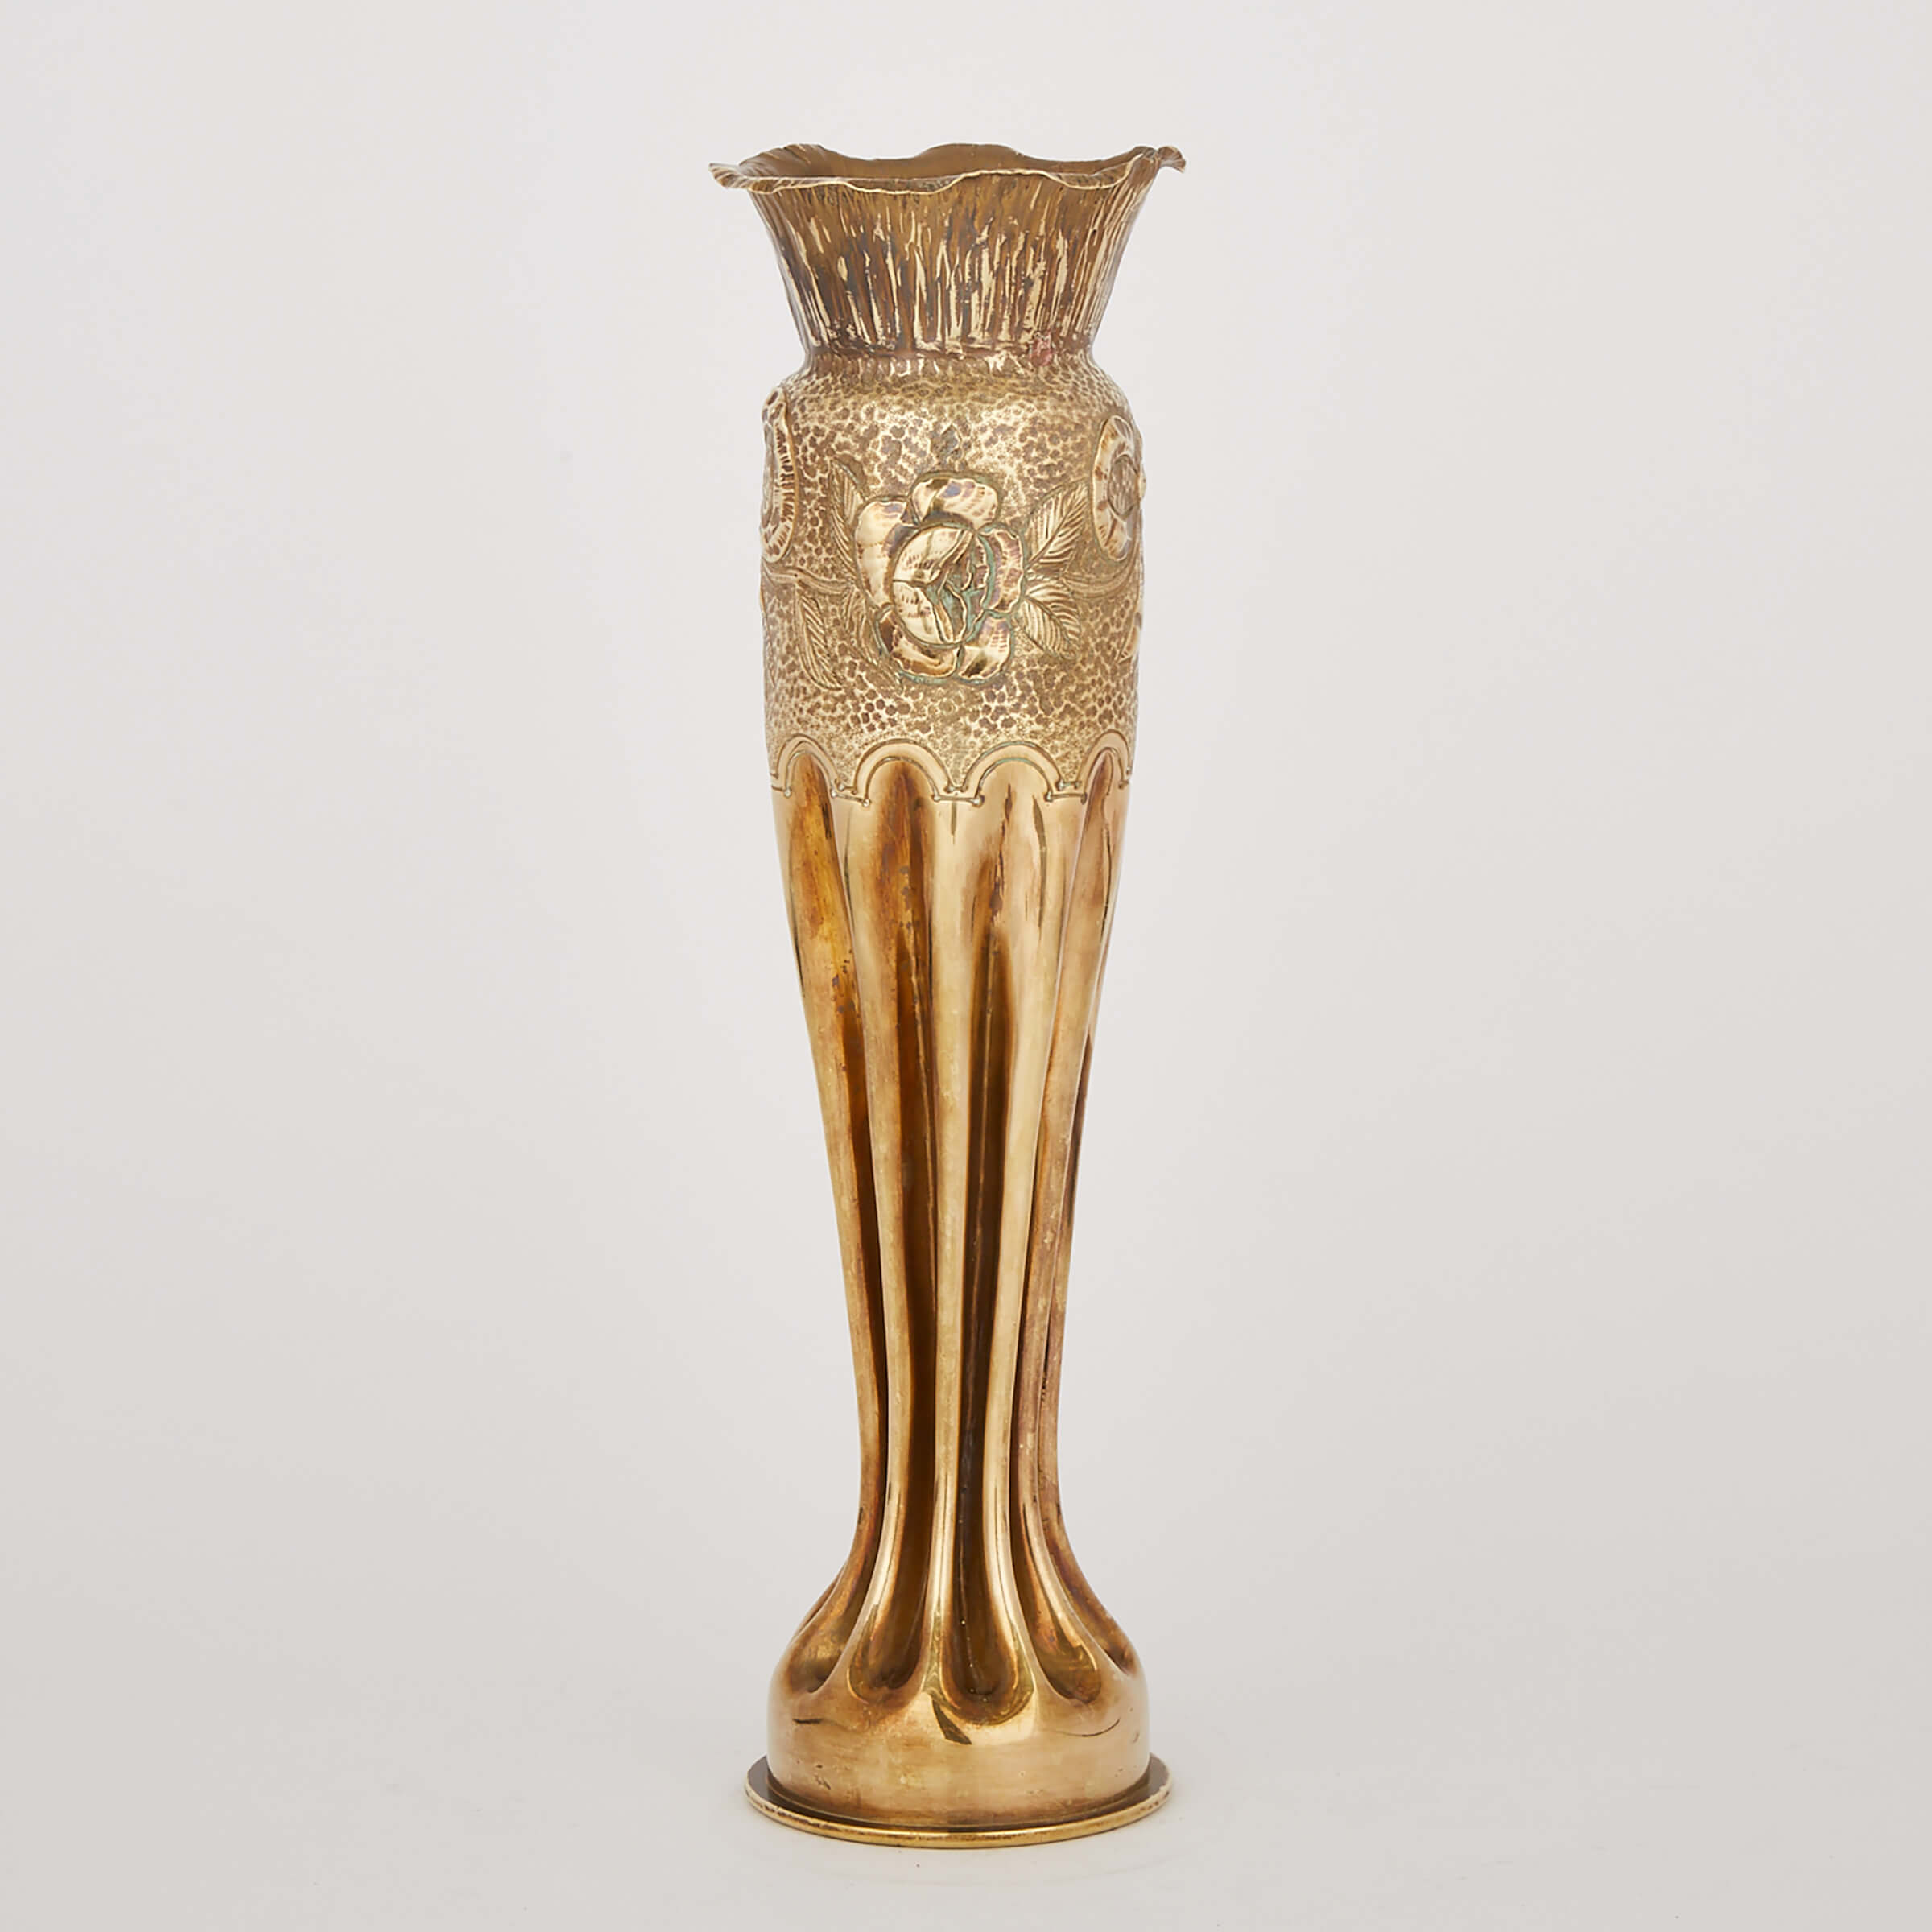 Large German WWI Repoussé Worked Brass Shell Casing ‘Trench Art’ Vase, 1915